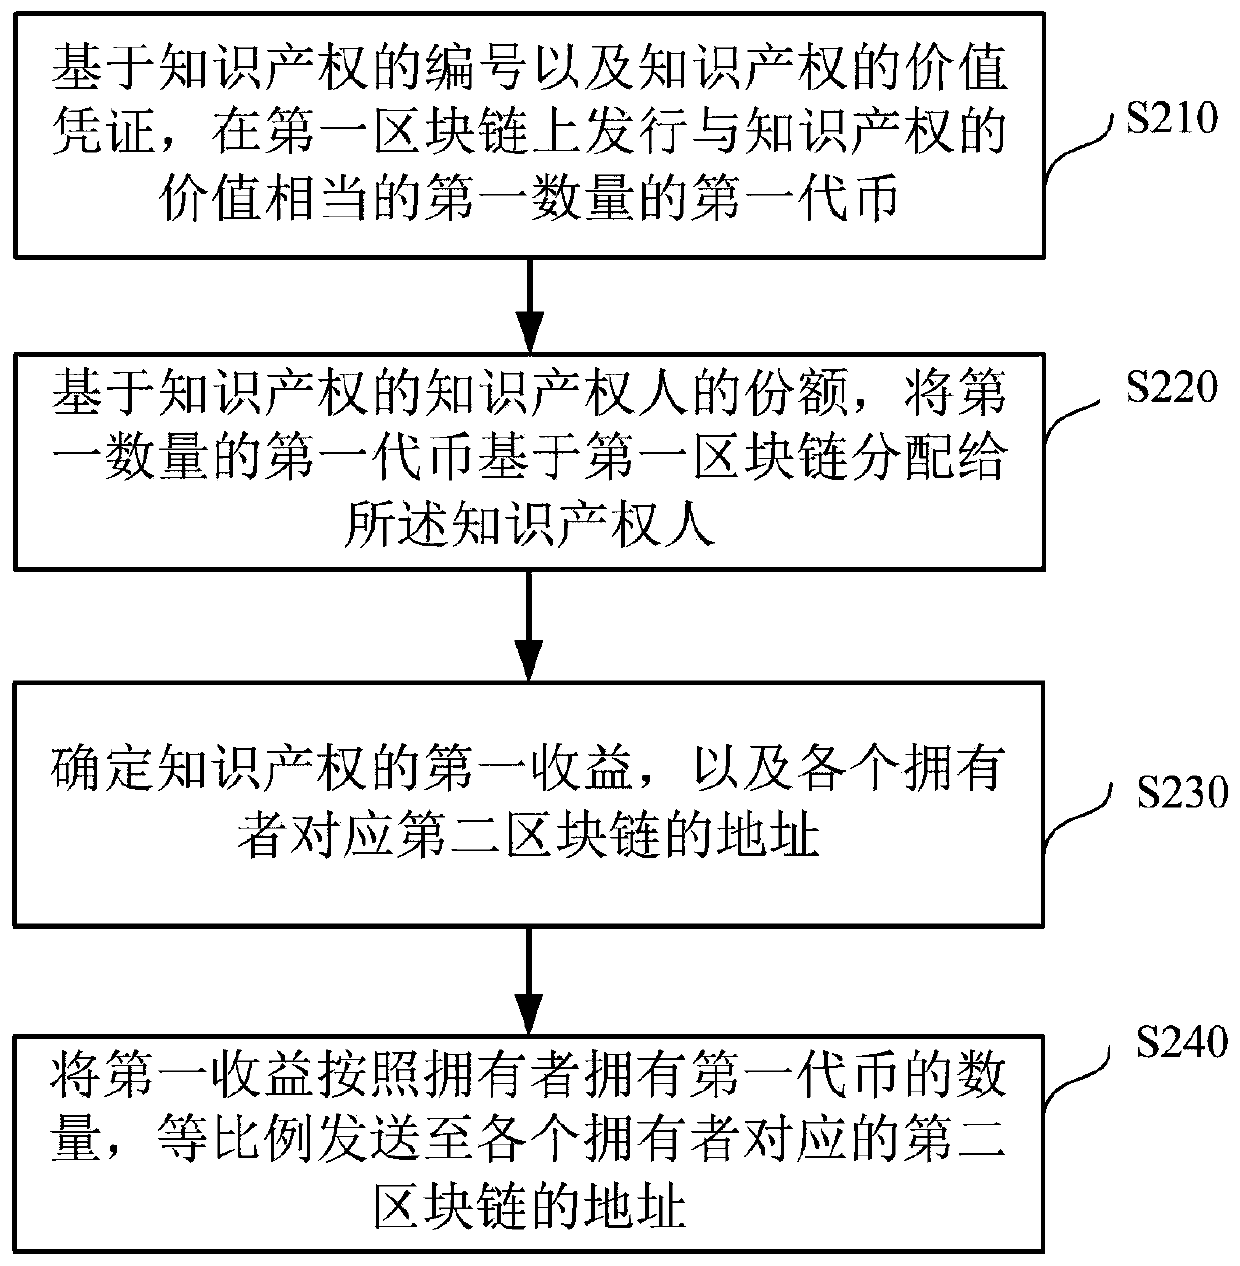 Intellectual property securitization method and device based on block chain